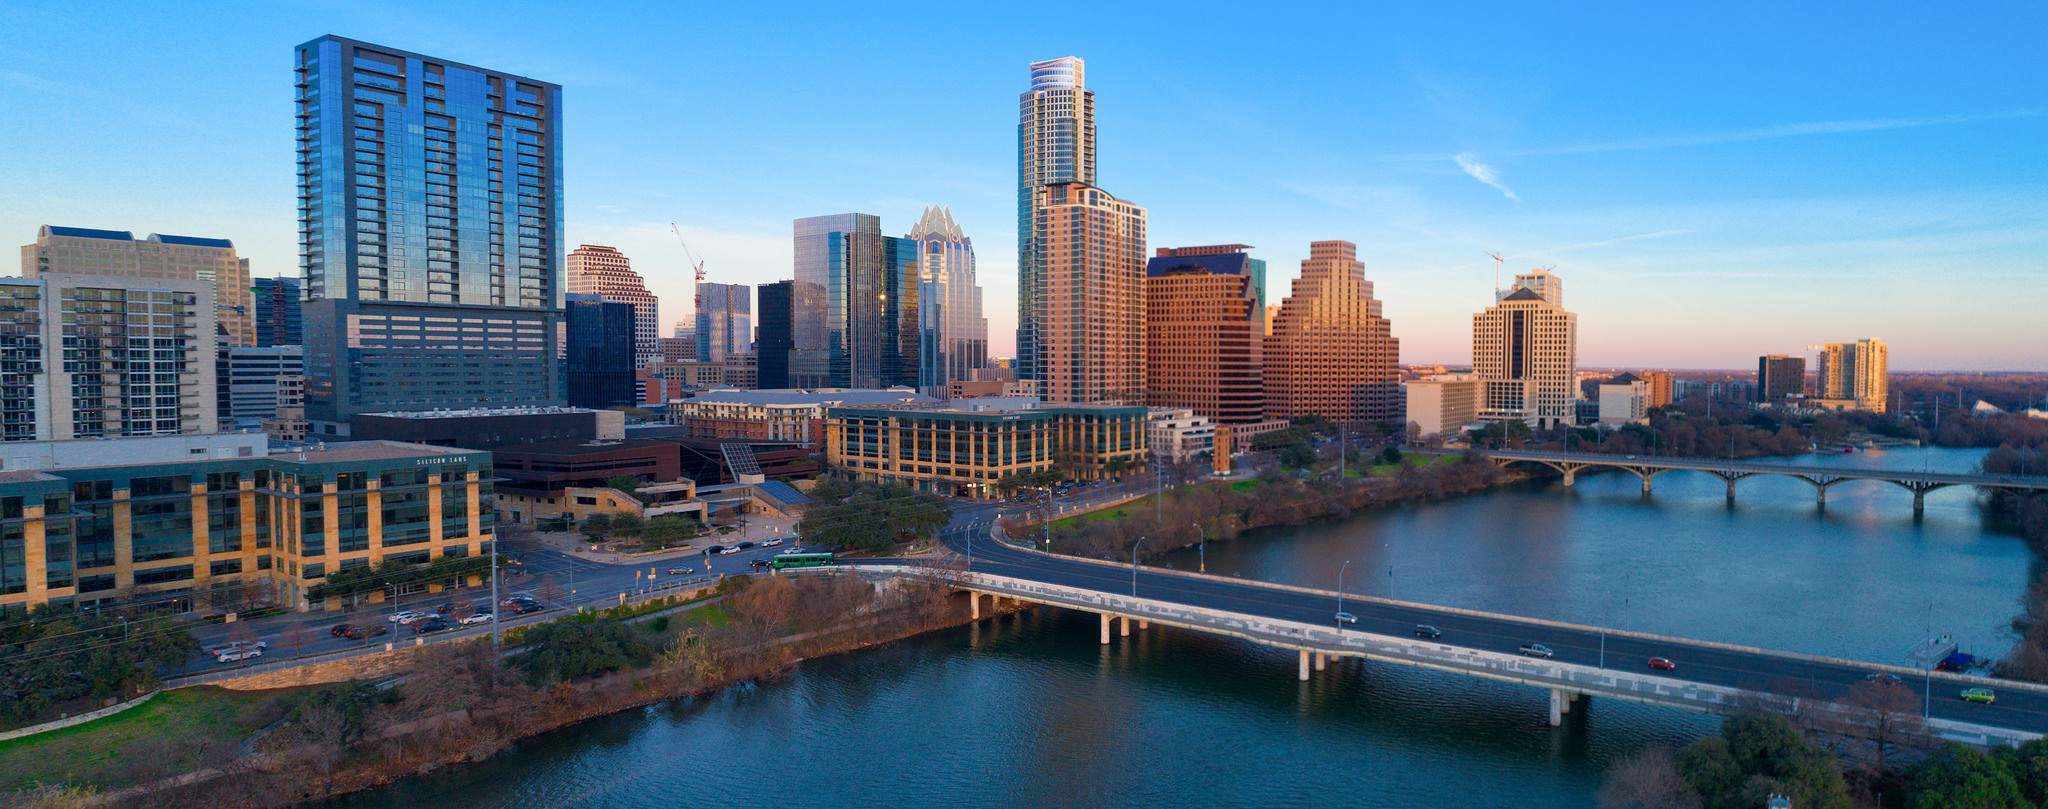 Can Austin innovate itself out of long meetings? Austin